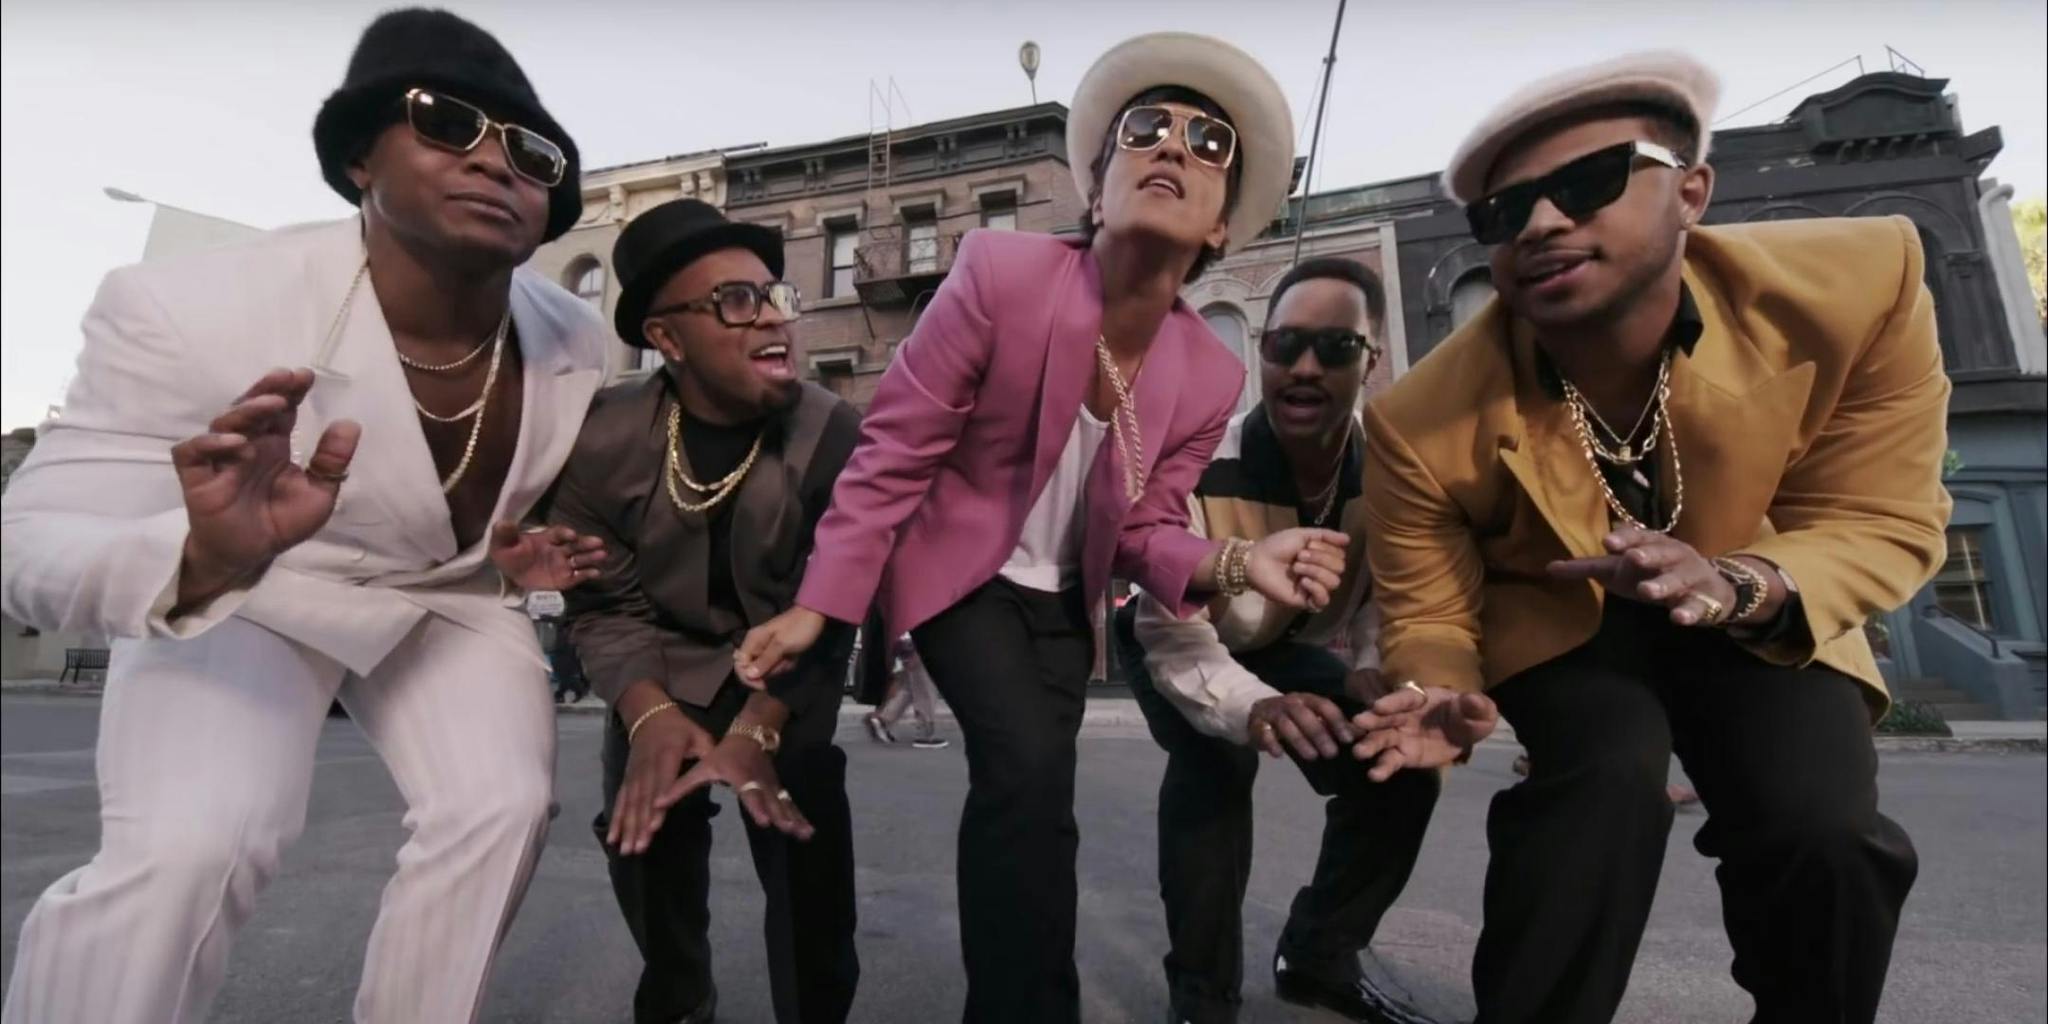 top 10 most viewed videos on youtube : uptown funk